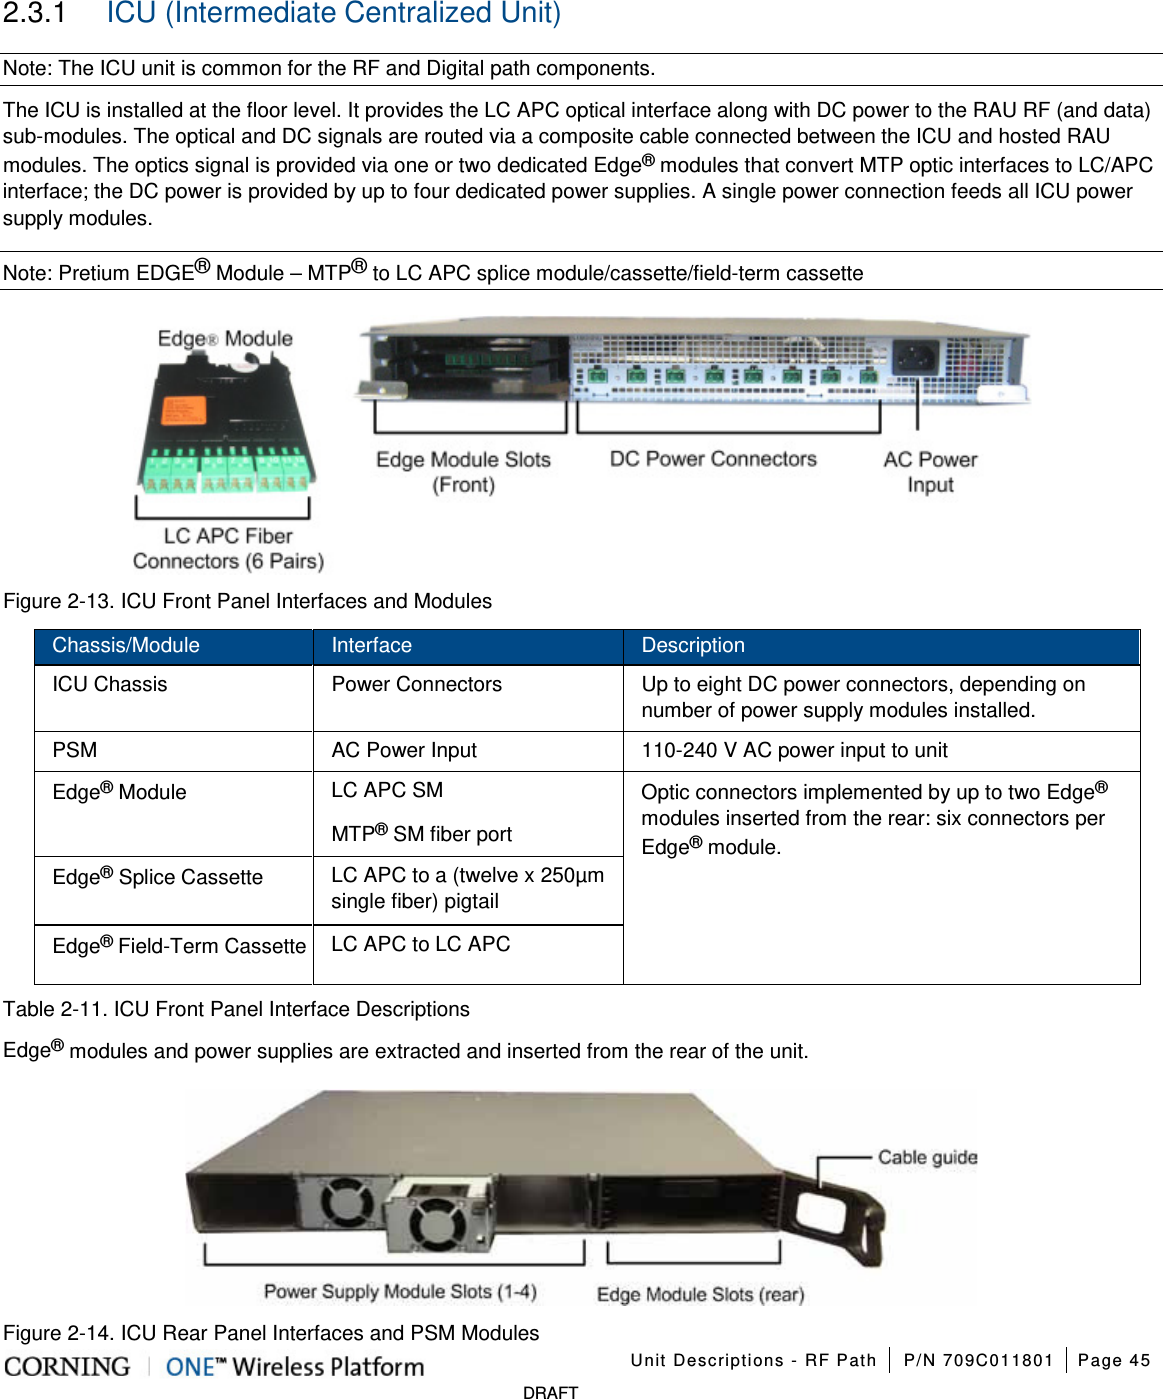    Unit Descriptions - RF Path P/N 709C011801 Page 45   DRAFT 2.3.1  ICU (Intermediate Centralized Unit) Note: The ICU unit is common for the RF and Digital path components. The ICU is installed at the floor level. It provides the LC APC optical interface along with DC power to the RAU RF (and data) sub-modules. The optical and DC signals are routed via a composite cable connected between the ICU and hosted RAU modules. The optics signal is provided via one or two dedicated Edge® modules that convert MTP optic interfaces to LC/APC interface; the DC power is provided by up to four dedicated power supplies. A single power connection feeds all ICU power supply modules. Note: Pretium EDGE® Module – MTP® to LC APC splice module/cassette/field-term cassette  Figure  2-13. ICU Front Panel Interfaces and Modules Chassis/Module Interface Description ICU Chassis Power Connectors Up to eight DC power connectors, depending on number of power supply modules installed. PSM AC Power Input 110-240 V AC power input to unit Edge® Module LC APC SM Optic connectors implemented by up to two Edge® modules inserted from the rear: six connectors per Edge® module. MTP® SM fiber port Edge® Splice Cassette LC APC to a (twelve x 250µm single fiber) pigtail Edge® Field-Term Cassette LC APC to LC APC Table  2-11. ICU Front Panel Interface Descriptions   Edge® modules and power supplies are extracted and inserted from the rear of the unit.  Figure  2-14. ICU Rear Panel Interfaces and PSM Modules 